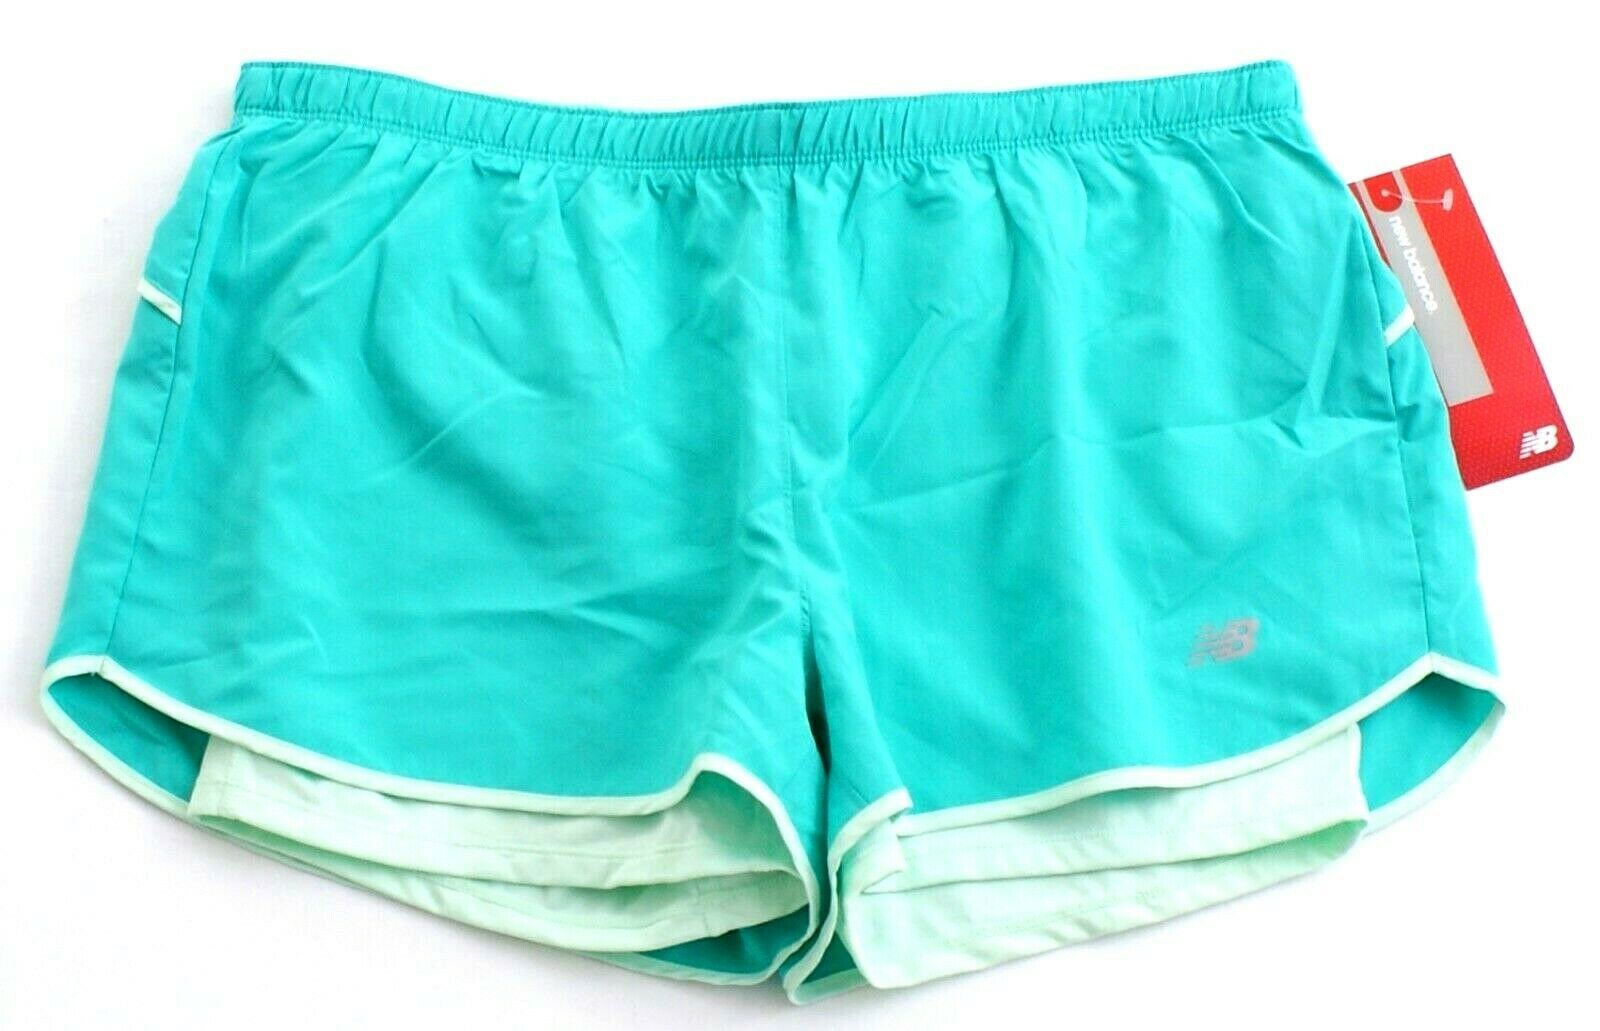 New Balance Turquoise 2 in 1 Woven Running Shorts Women's NWT - Shorts